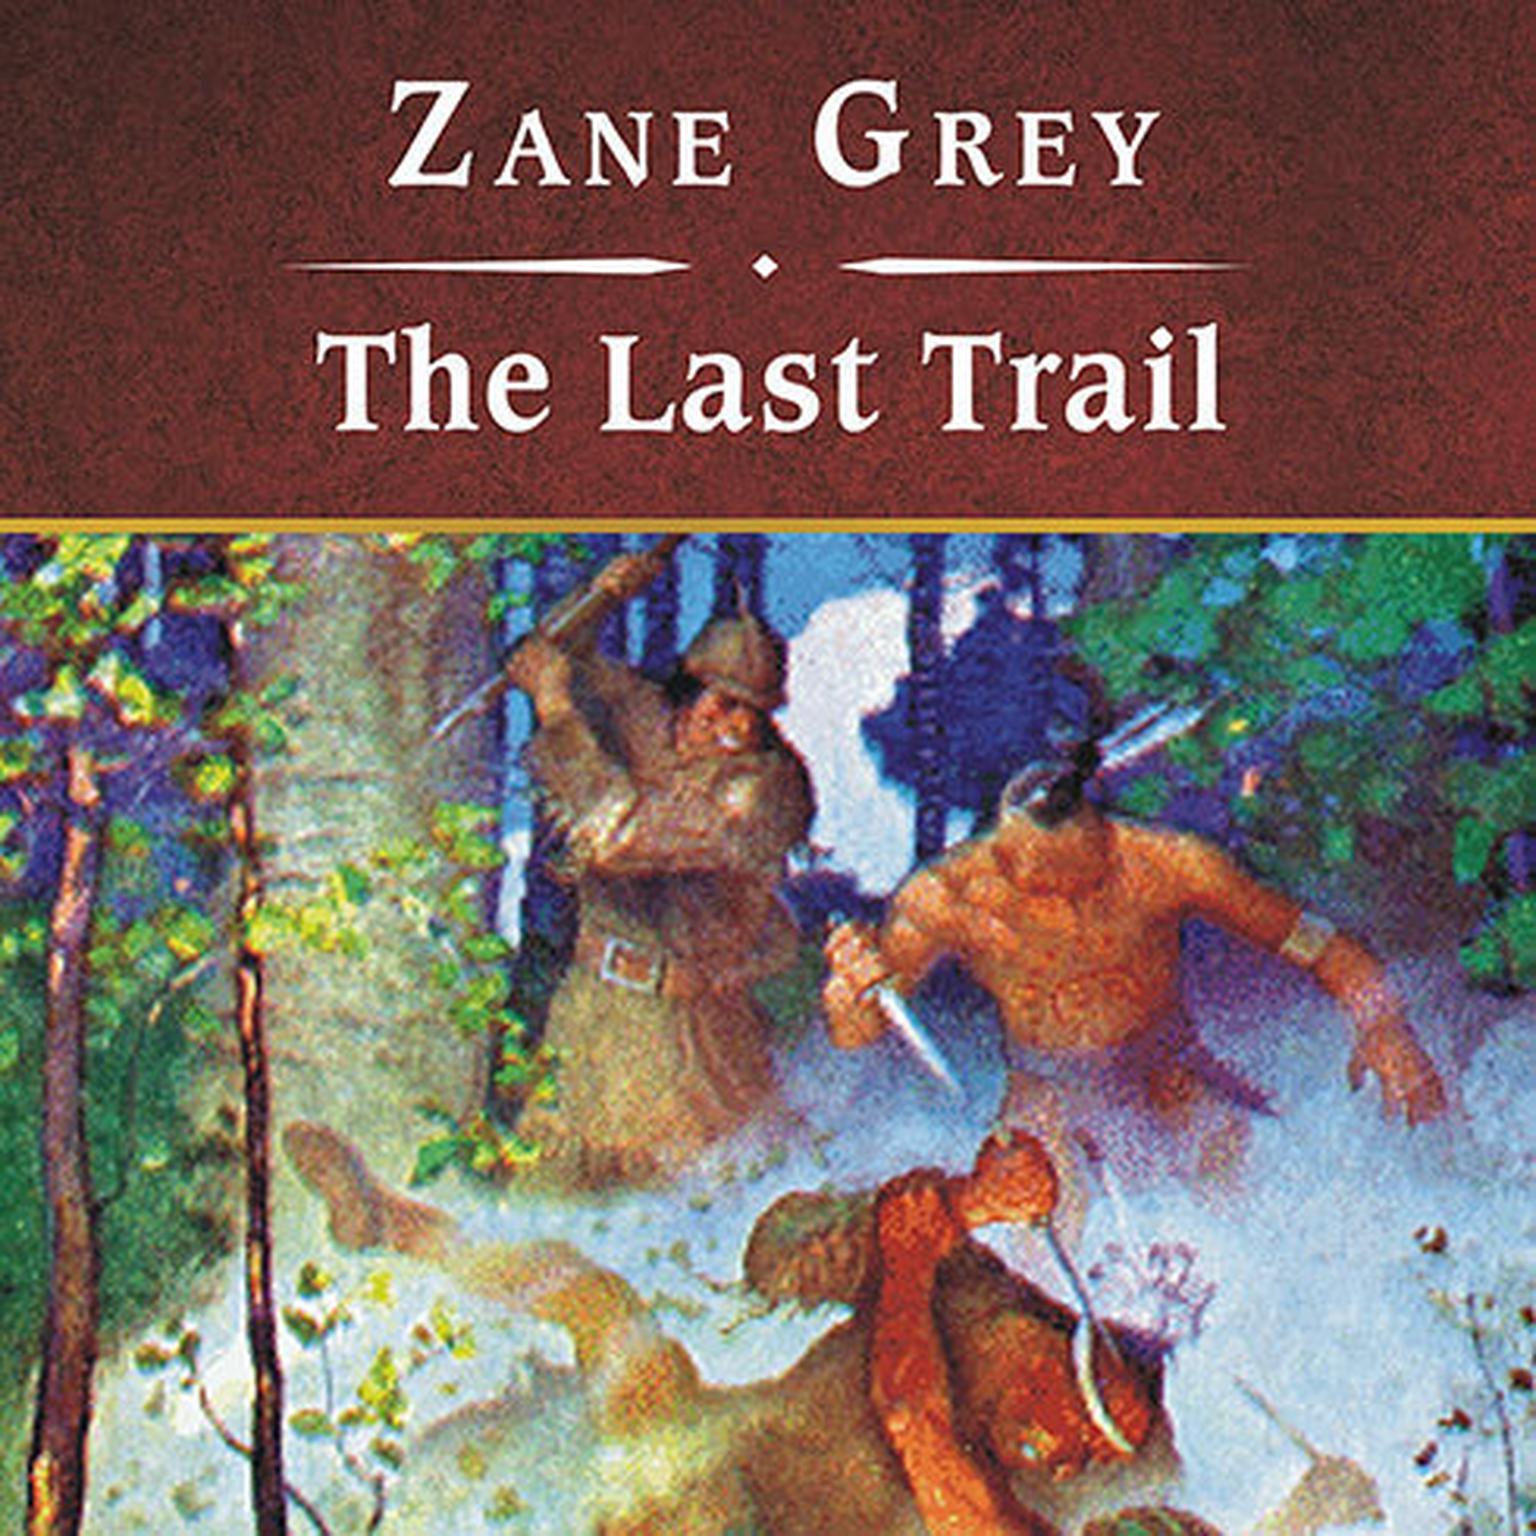 The Last Trail, with eBook Audiobook, by Zane Grey